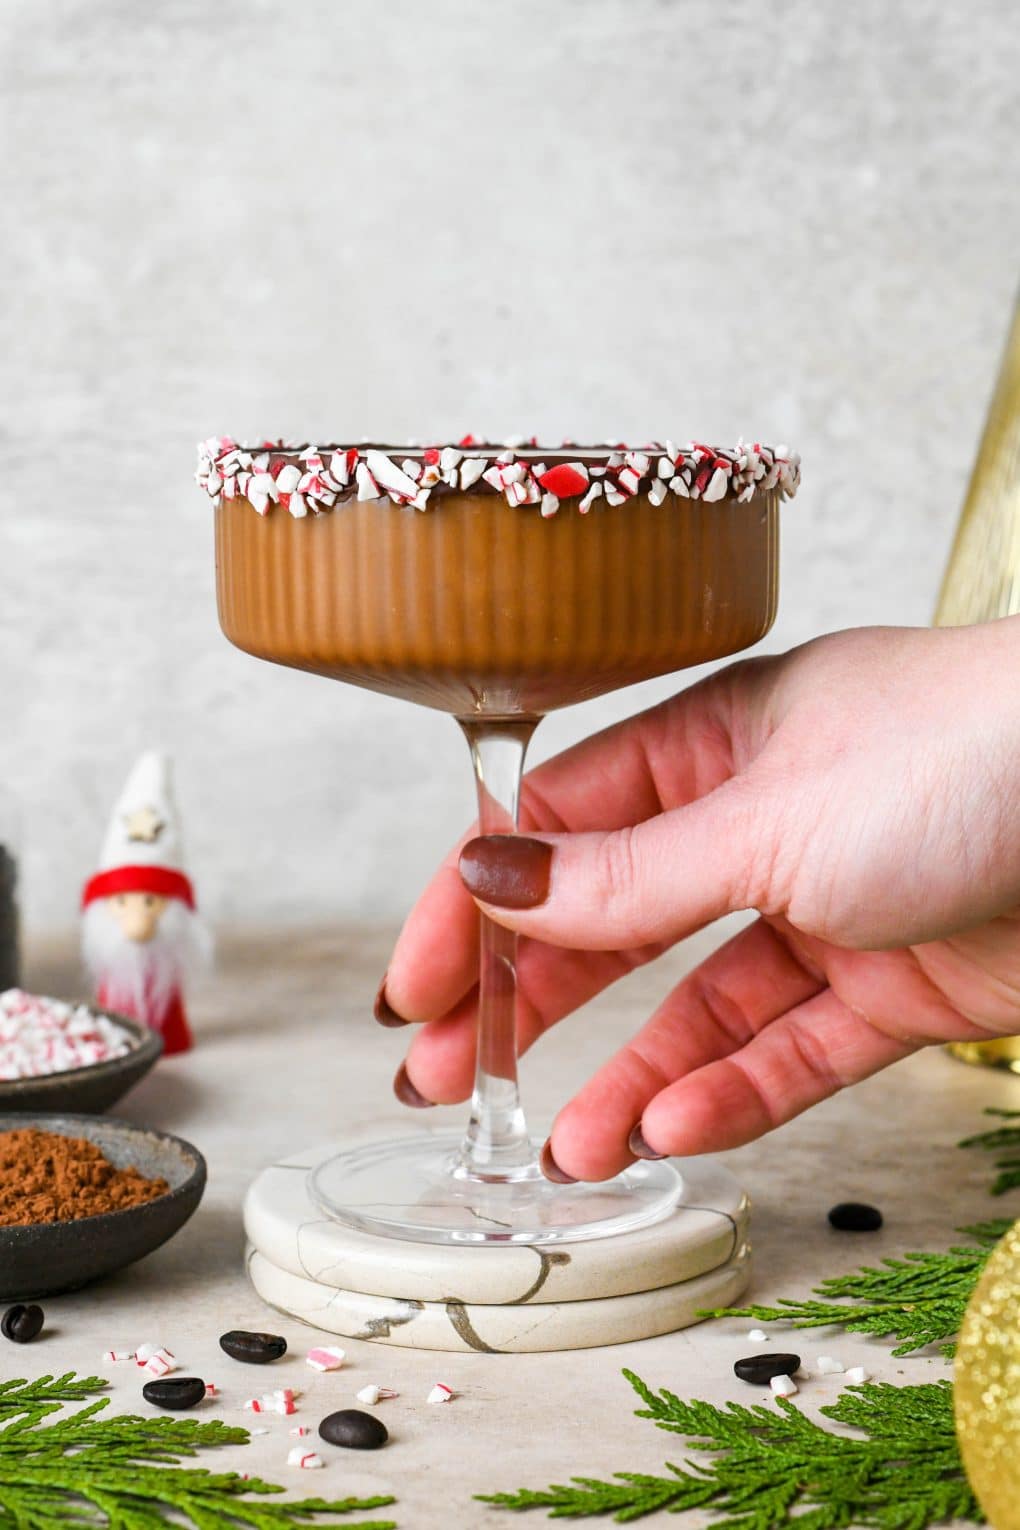 A peppermint mocha espresso martini in a martini glass with the rim lined with chocolate and peppermint candy, a hand reaching into the frame to hold the stem.